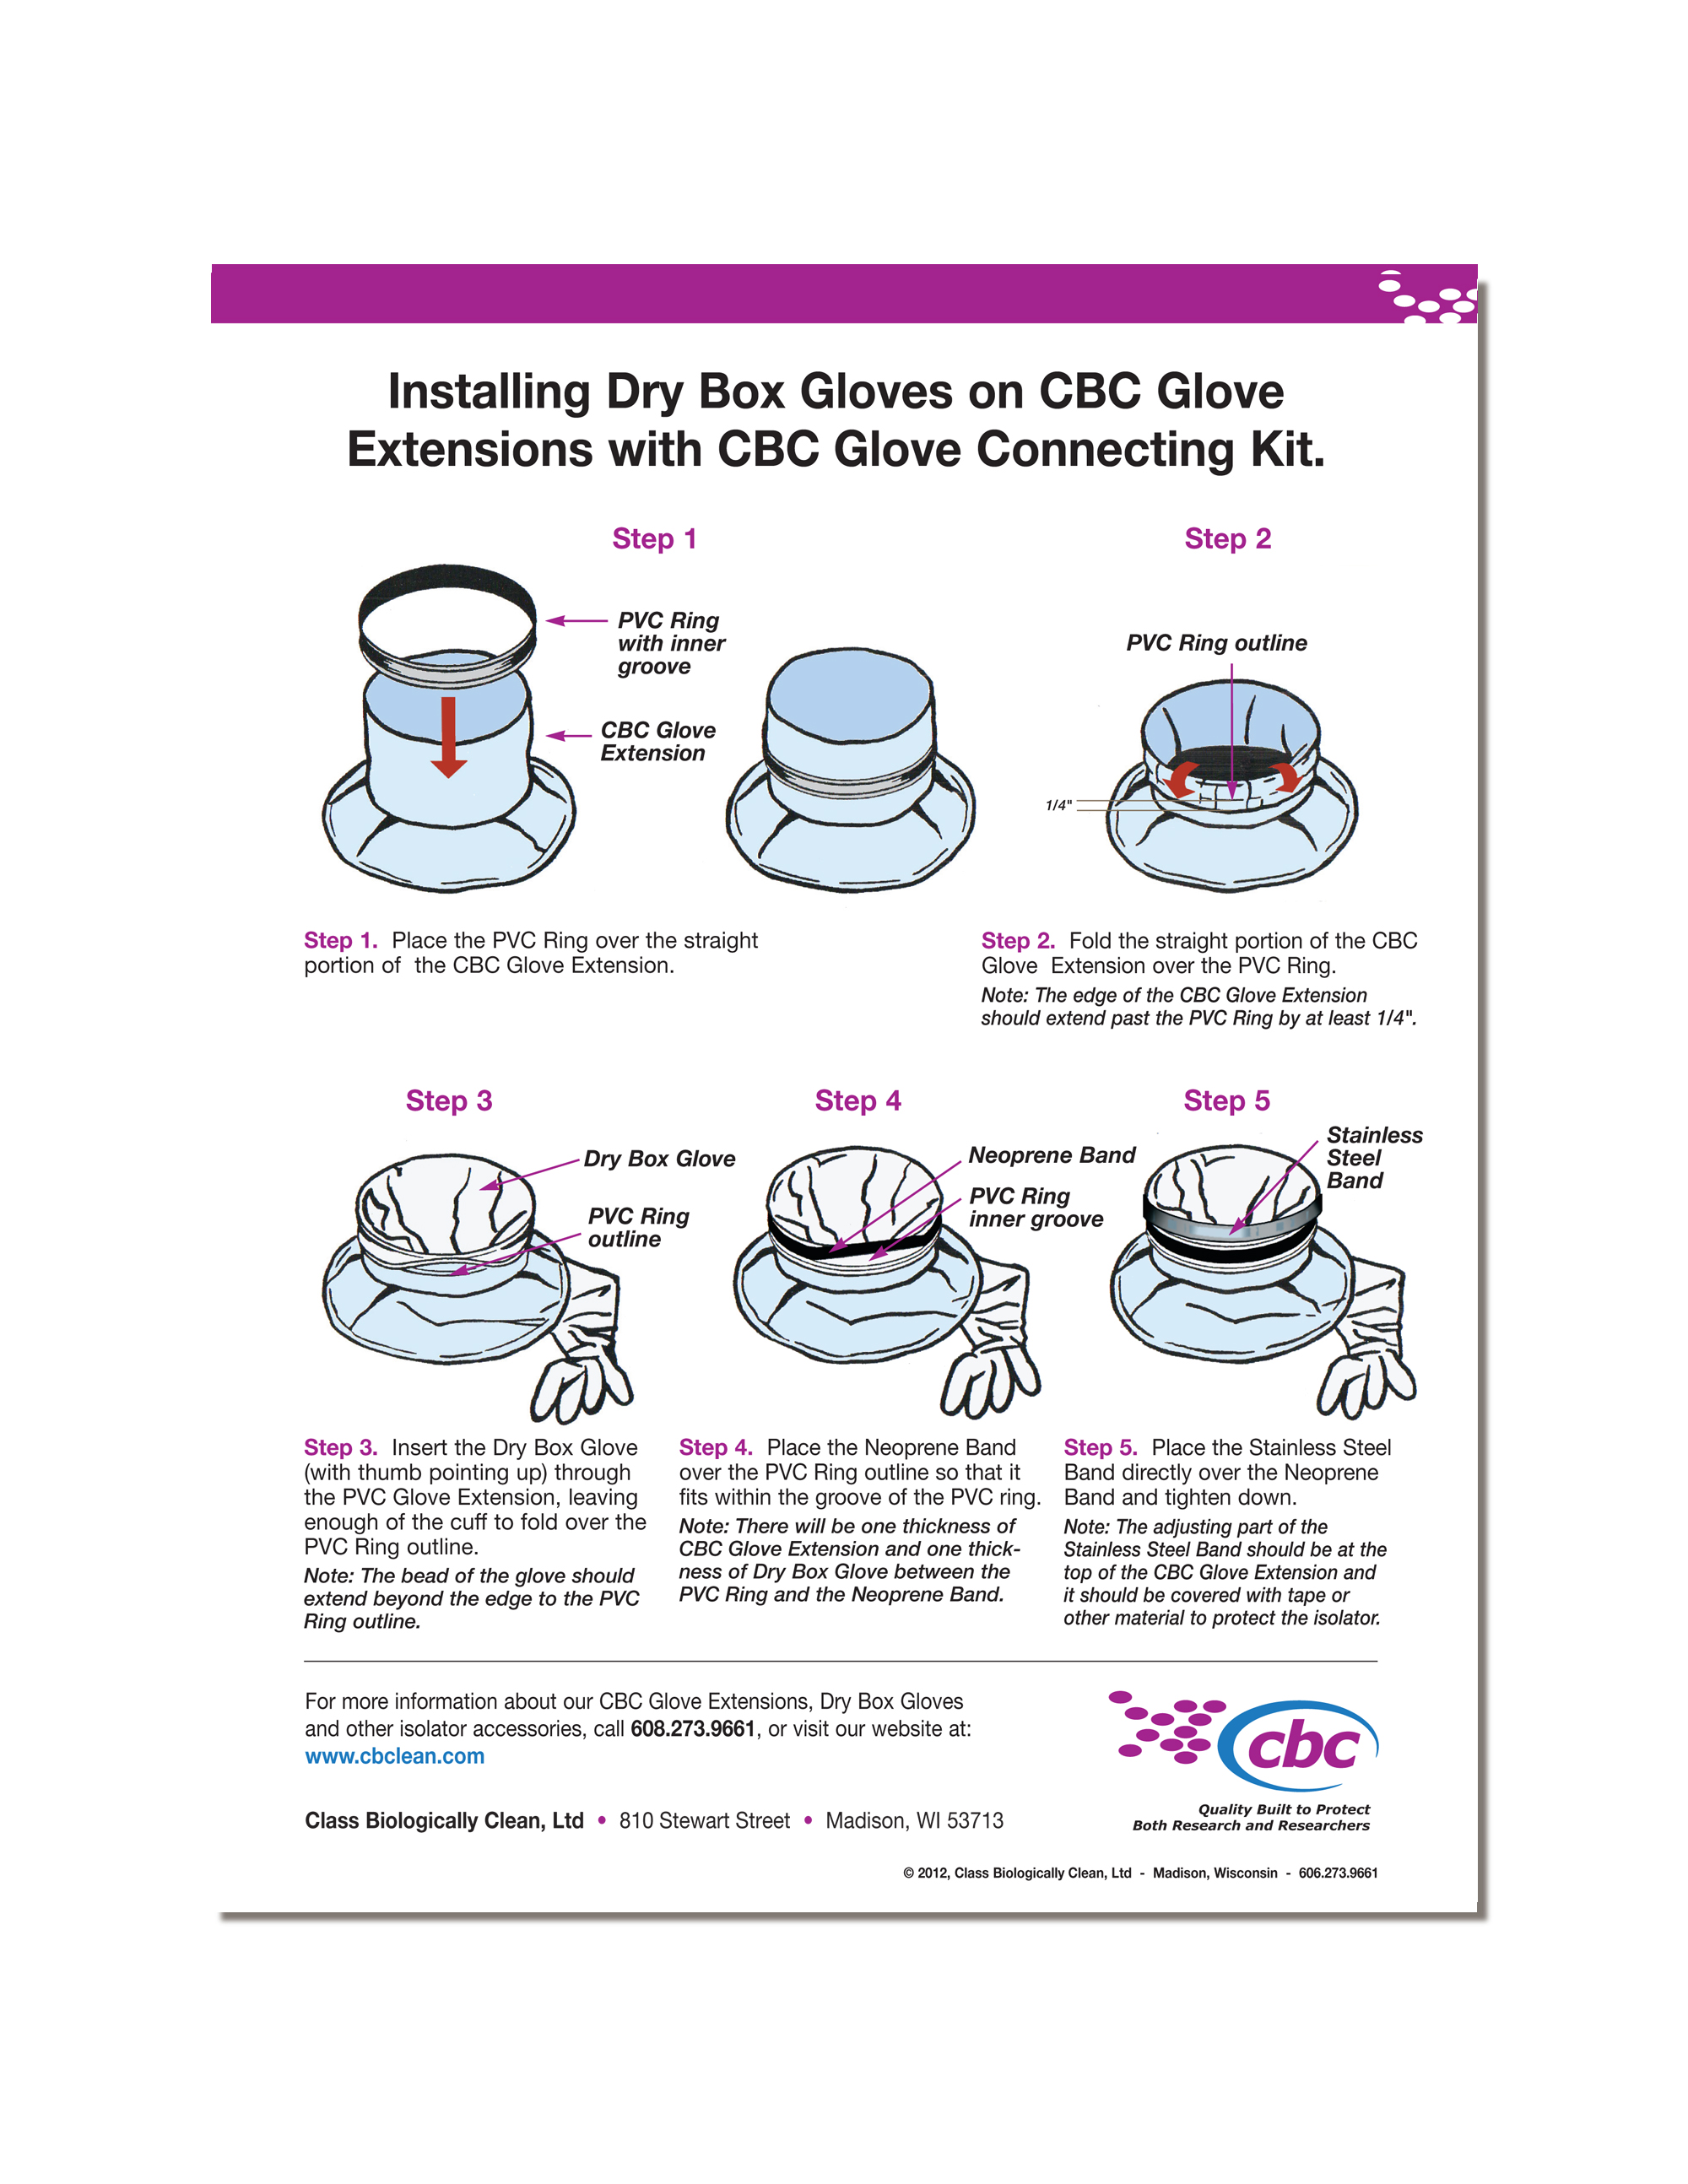 Download a printable flyer about CBC's germ-free shipper sleeve that safeguards your gnotobiotic animal's health status during shipping. Click here to download flyer.